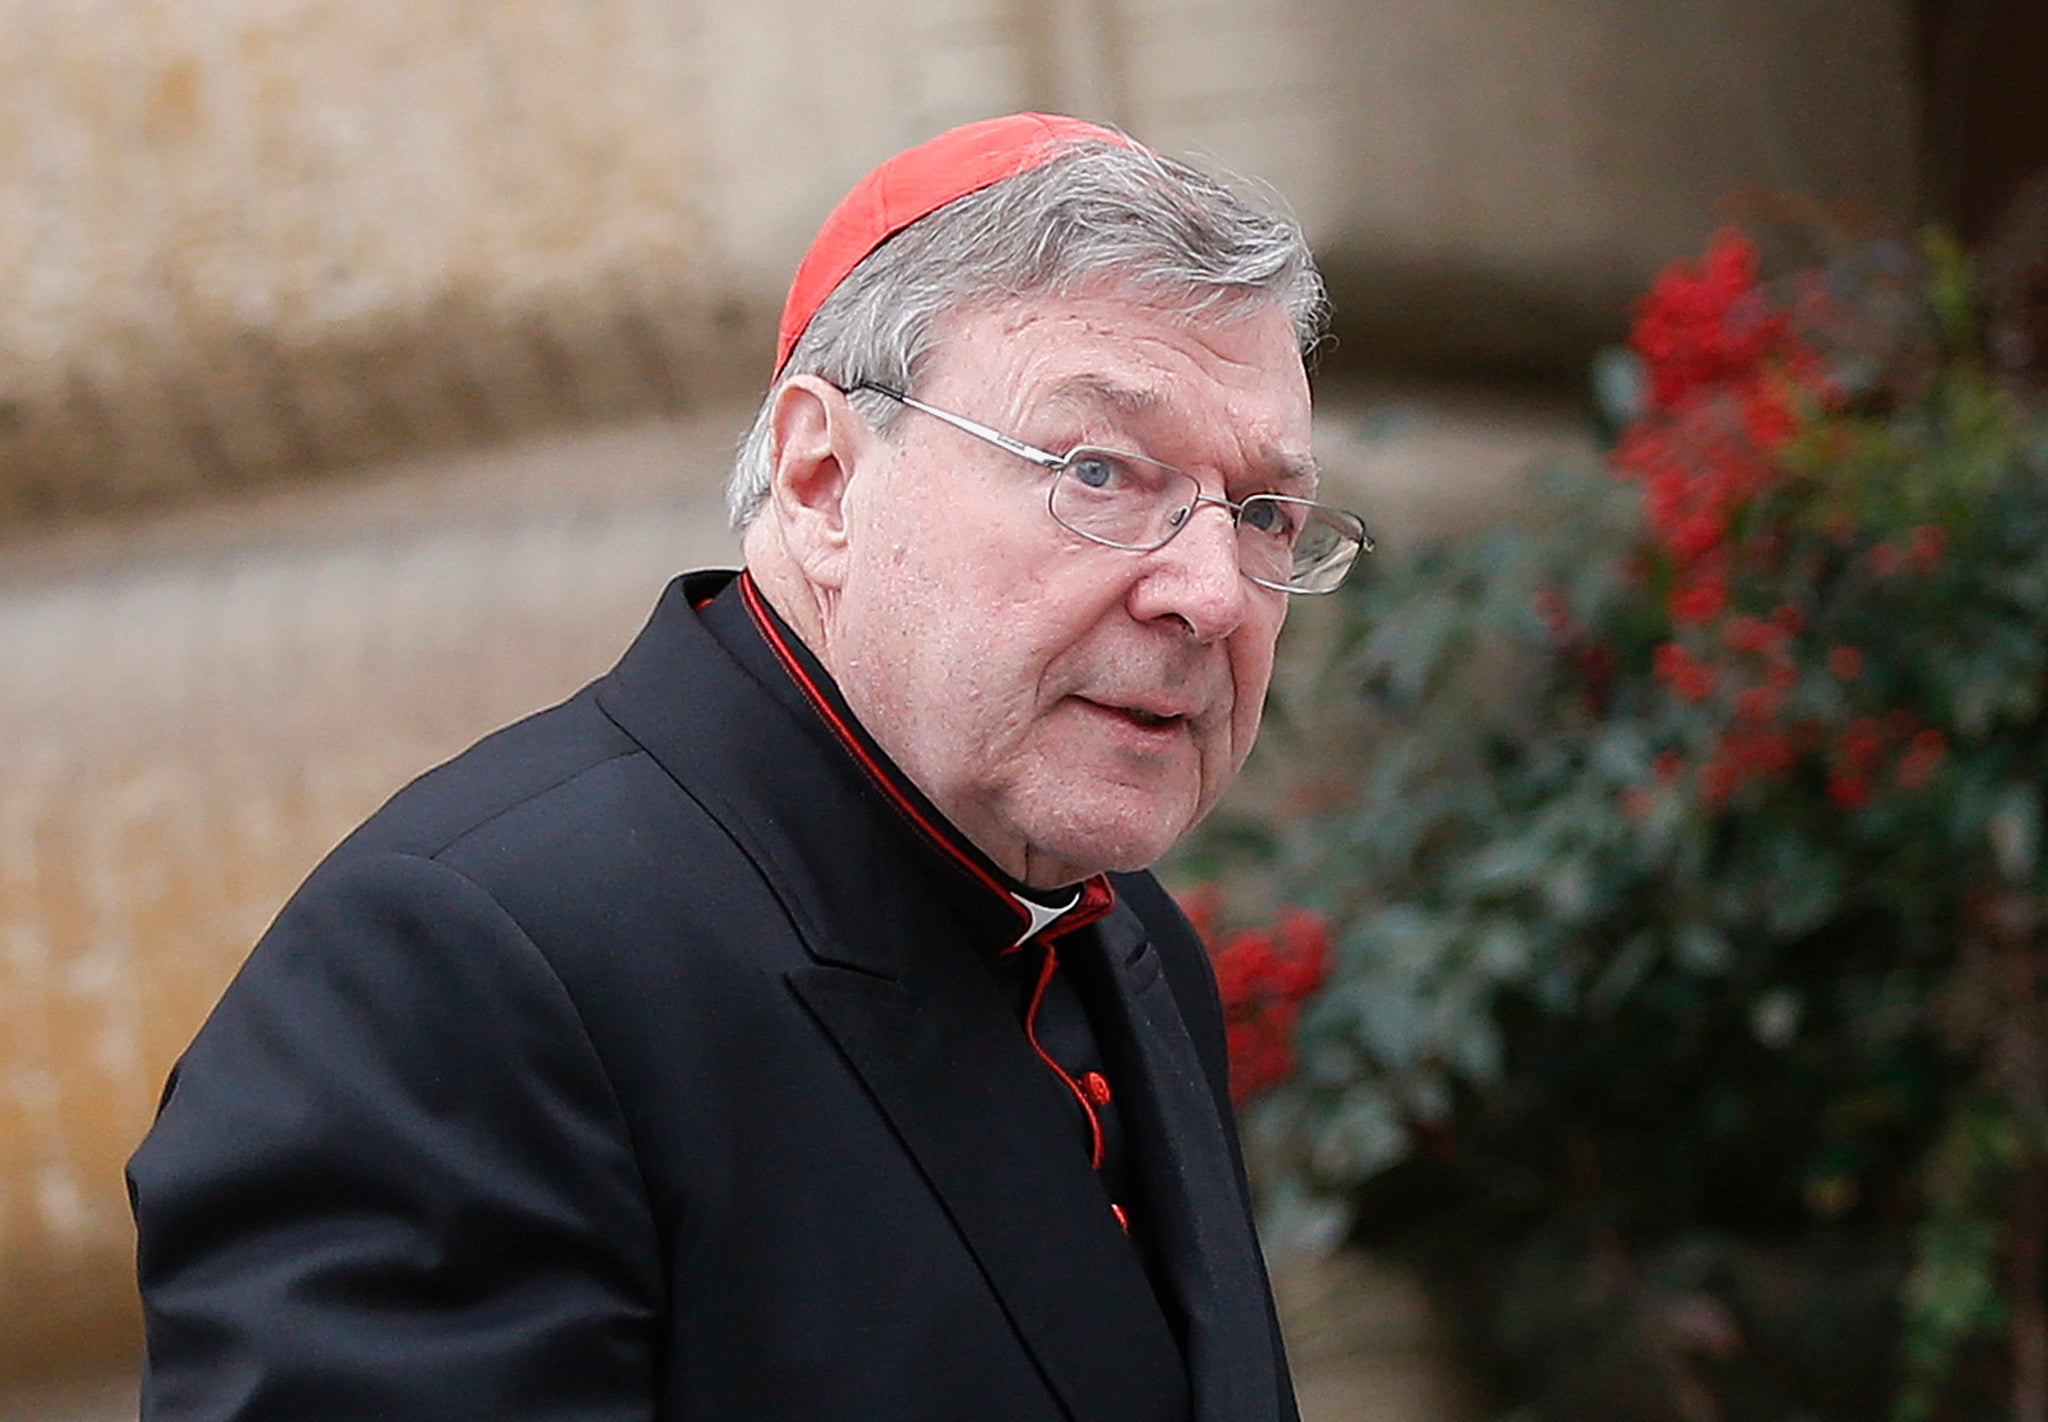 Cardinal Pell has provoked the ire of Australian truckers after placing them within an analogy about child abuse within the Catholic Church